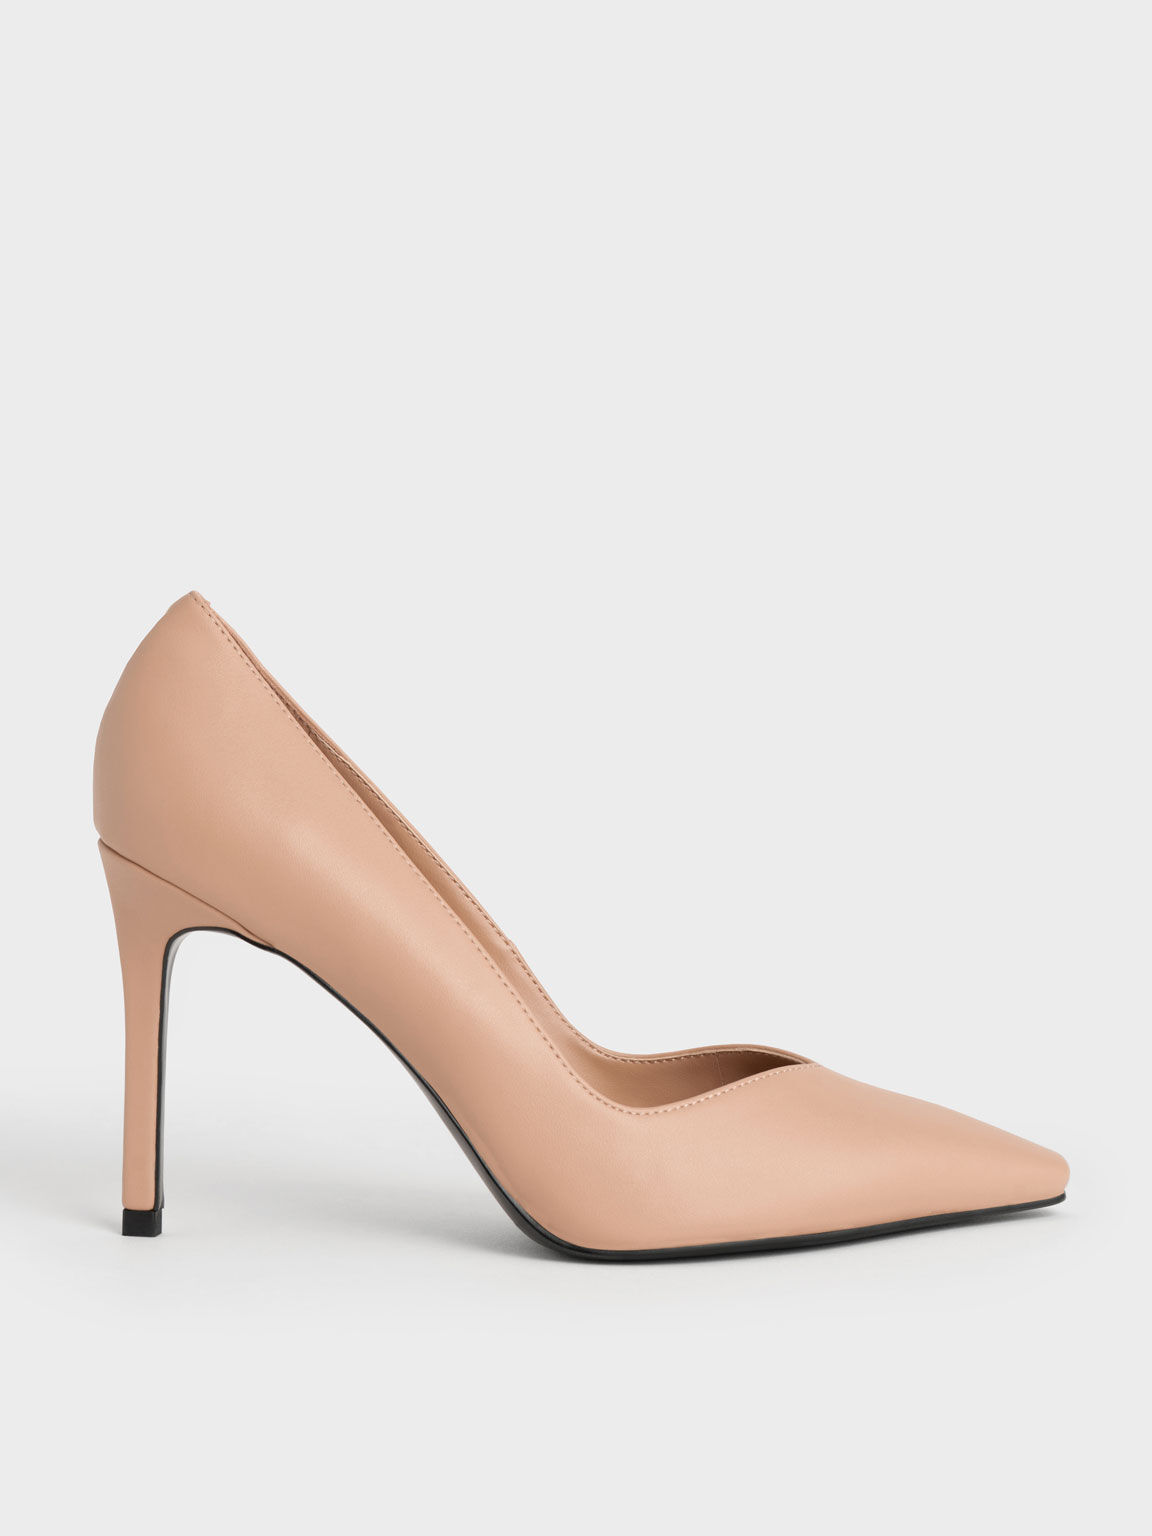 Tapered Square-Toe Pumps - Nude